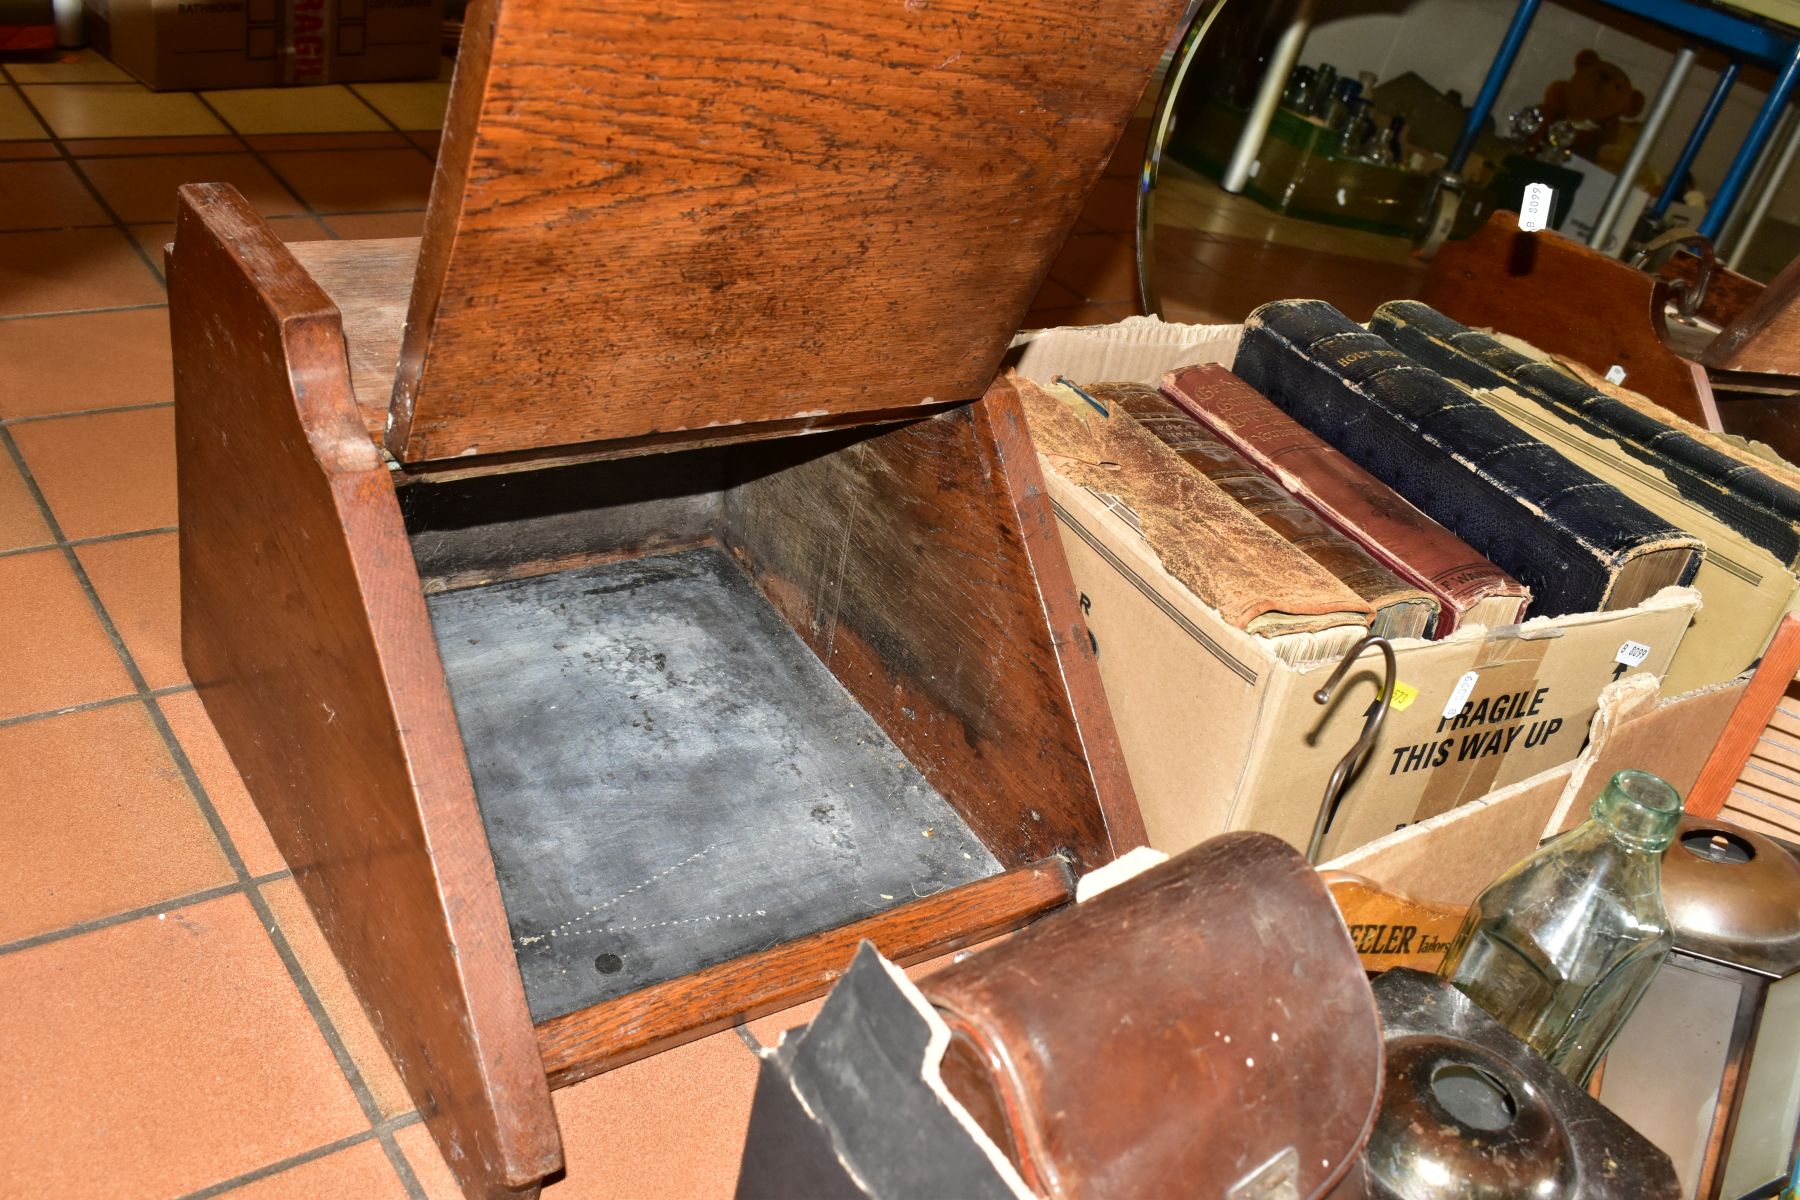 TWO BOXES AND LOOSE MIRROR, COAL BOX, BOOKS AND SUNDRY ITEMS, to include a coal box with - Image 10 of 11